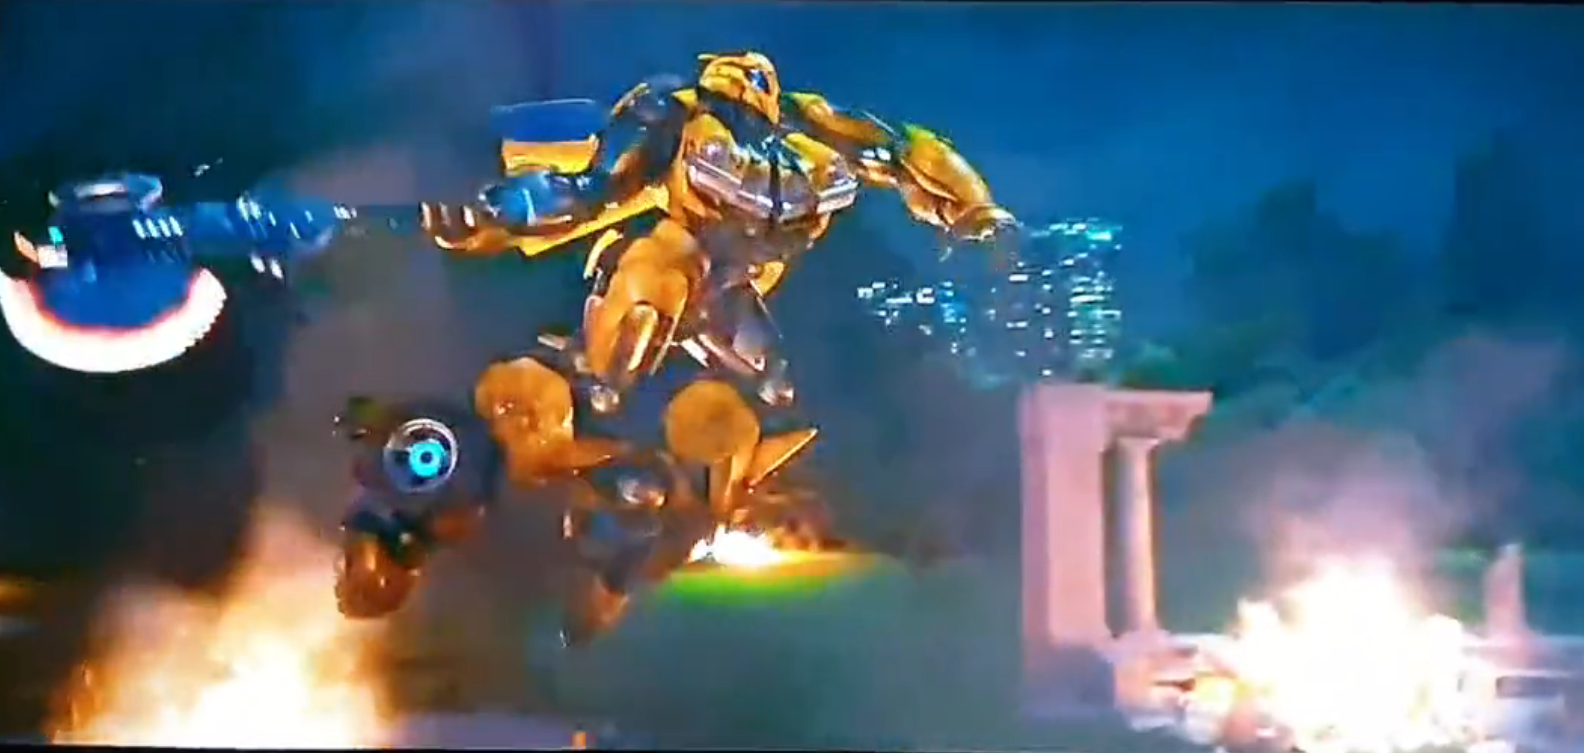 Does Bumblebee die in Transformers: Rise of the Beasts? - Dexerto